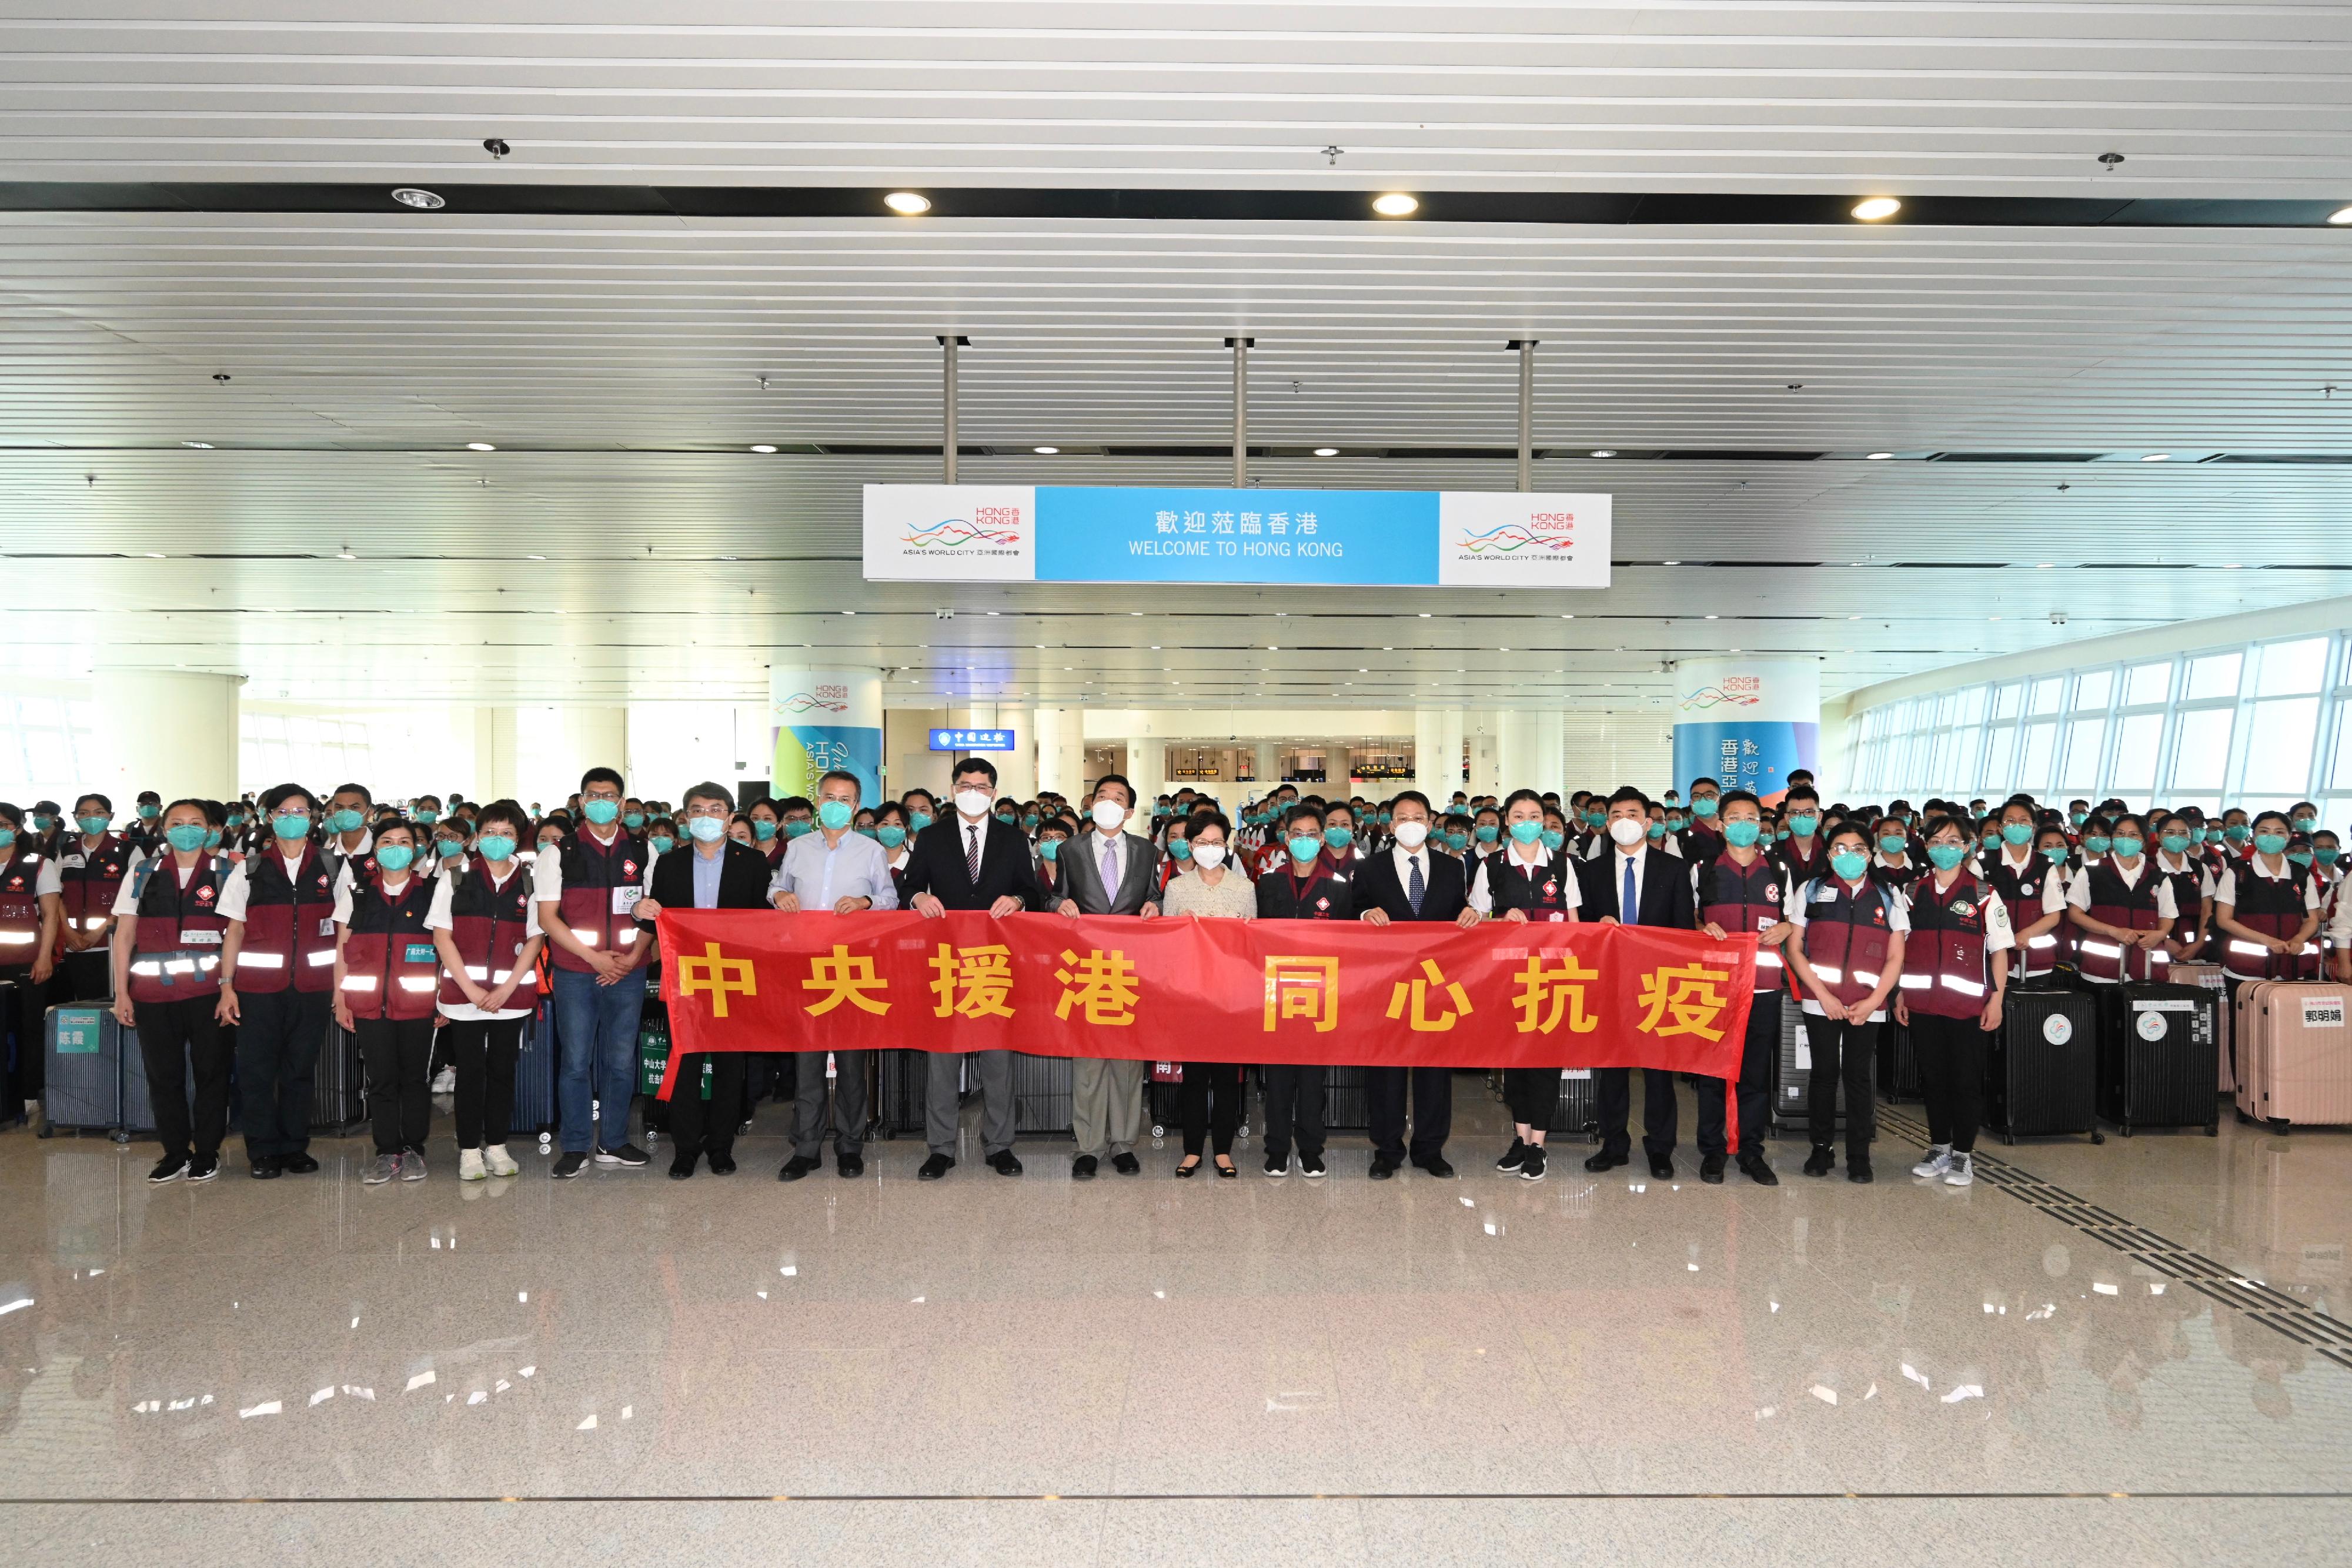 The Chief Executive, Mrs Carrie Lam, today (March 16) welcomed a Mainland medical support team at the Heung Yuen Wai Boundary Control Point. Photo shows (front row, from eighth left) the Chief Executive of the Hospital Authority (HA), Dr Tony Ko; the Chairman of the HA, Mr Henry Fan; Mrs Lam; the Vice-president of the Guangdong Provincial Hospital of Traditional Chinese Medicine, Mr Zhang Zhongde; and Deputy Director of the Liaison Office of the Central People's Government in the Hong Kong Special Administrative Region Mr Yin Zonghua, posing with the Mainland medical support team.